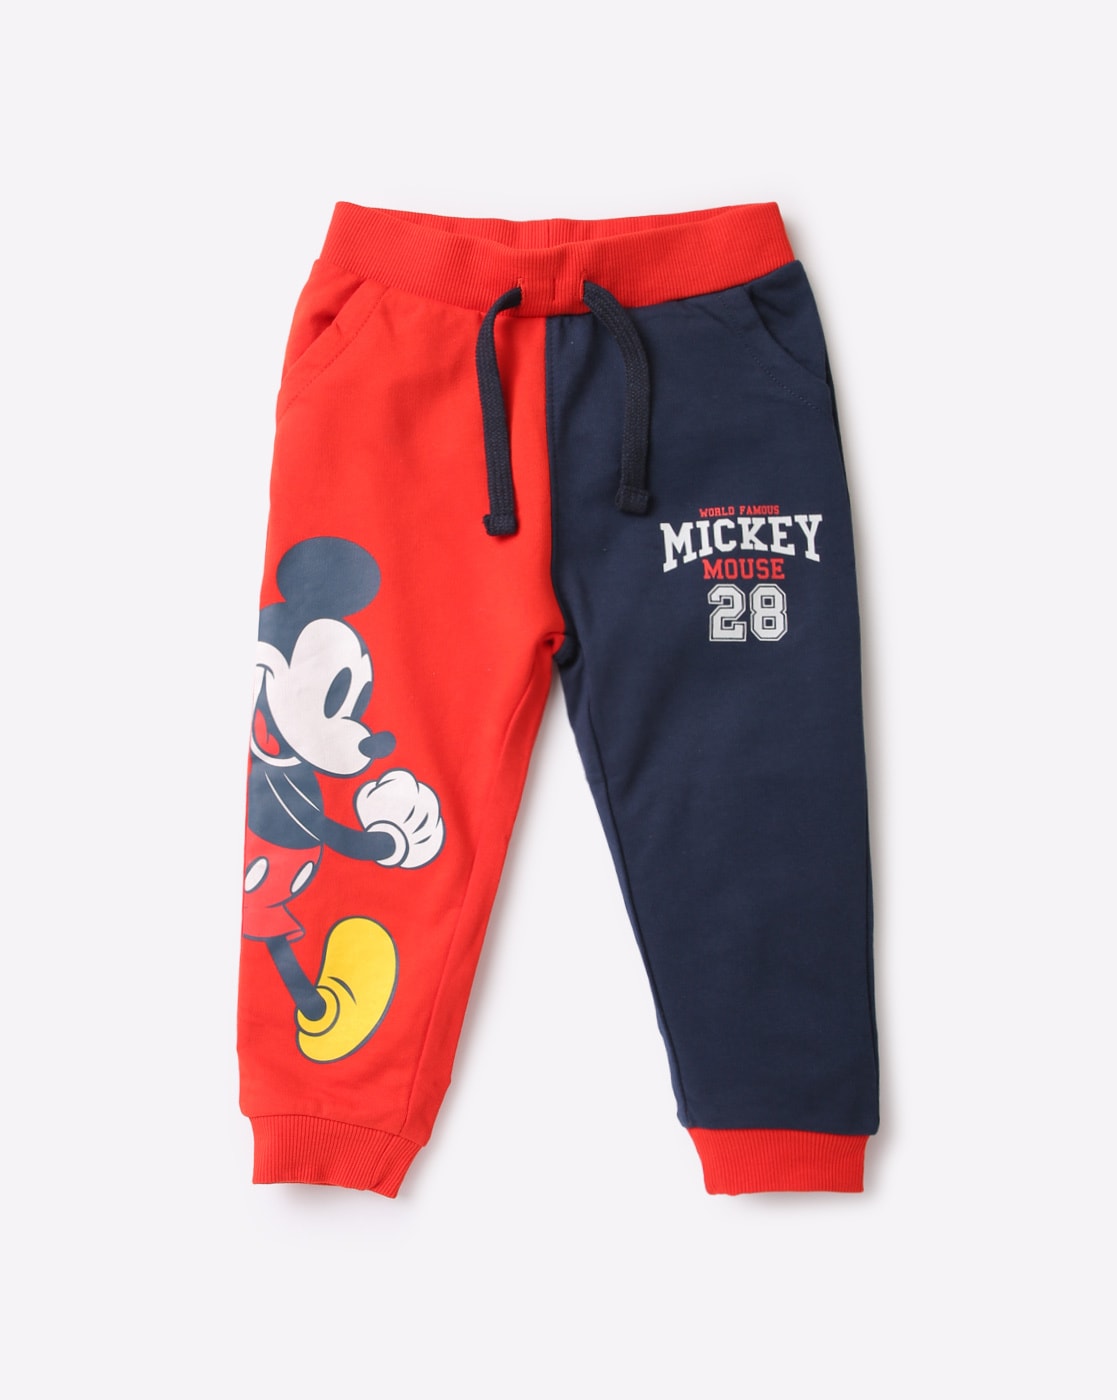 Disney Mickey Mouse Baby Boys 2 Pack Pants 12 Months Black/Gray :  Amazon.in: Clothing & Accessories